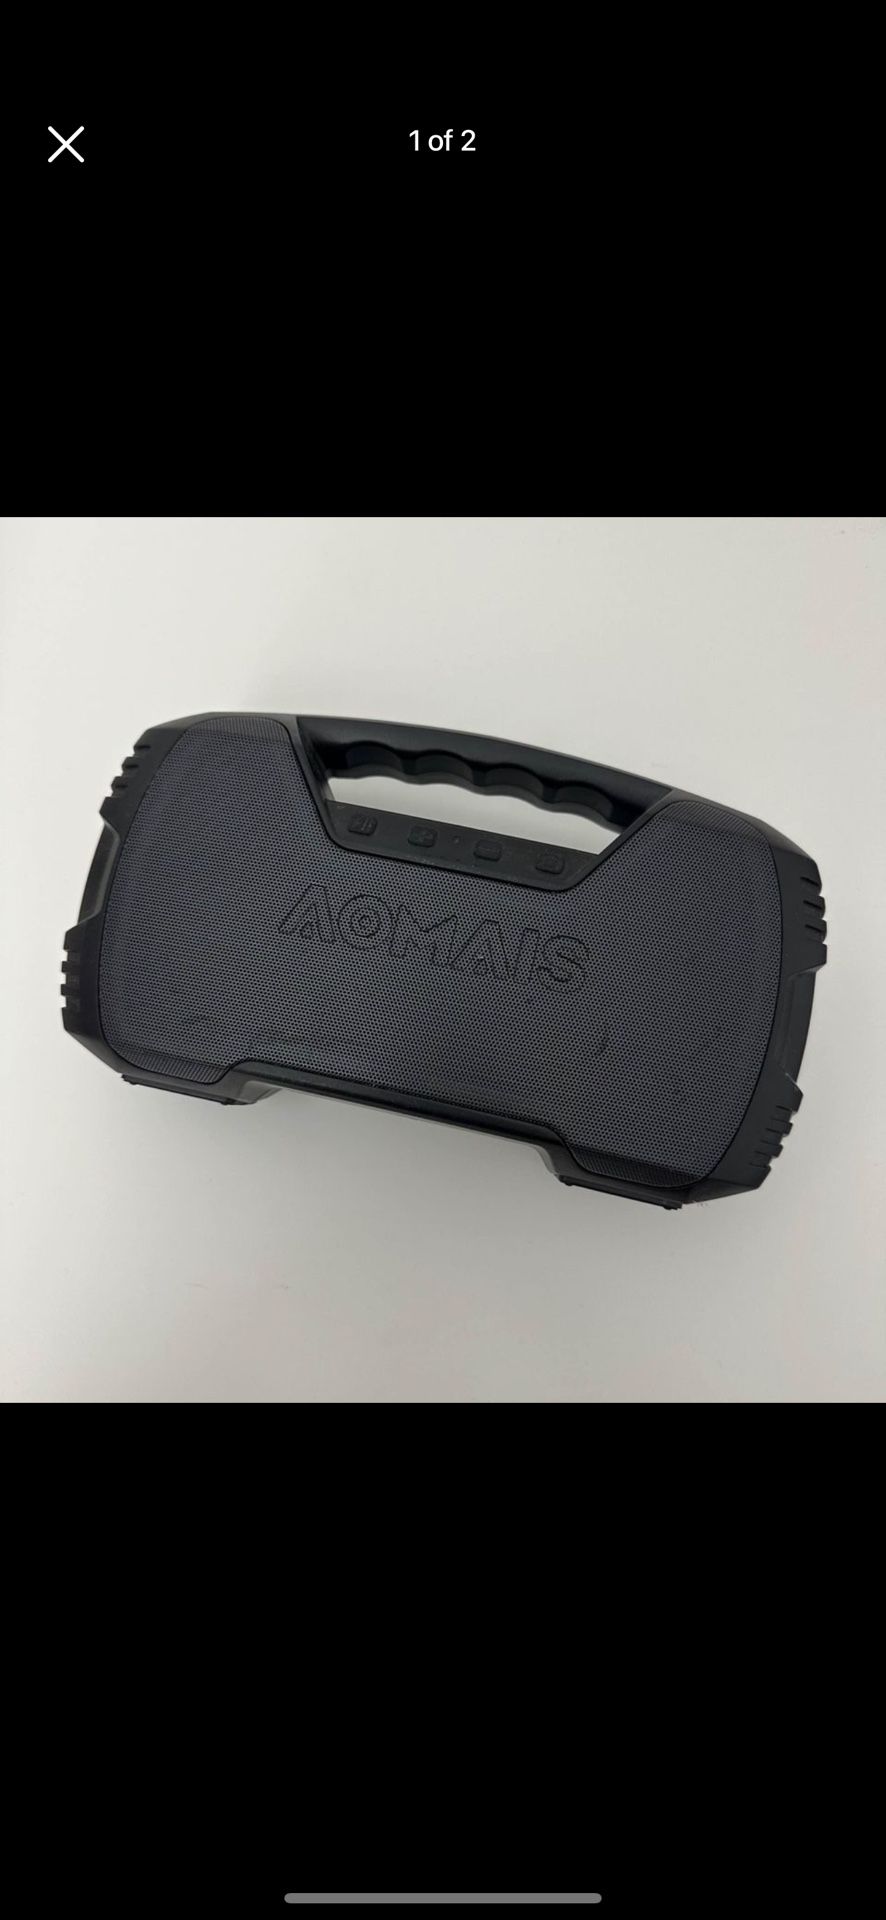 led color changing speaker aomais - goes to best offer needs to go asap